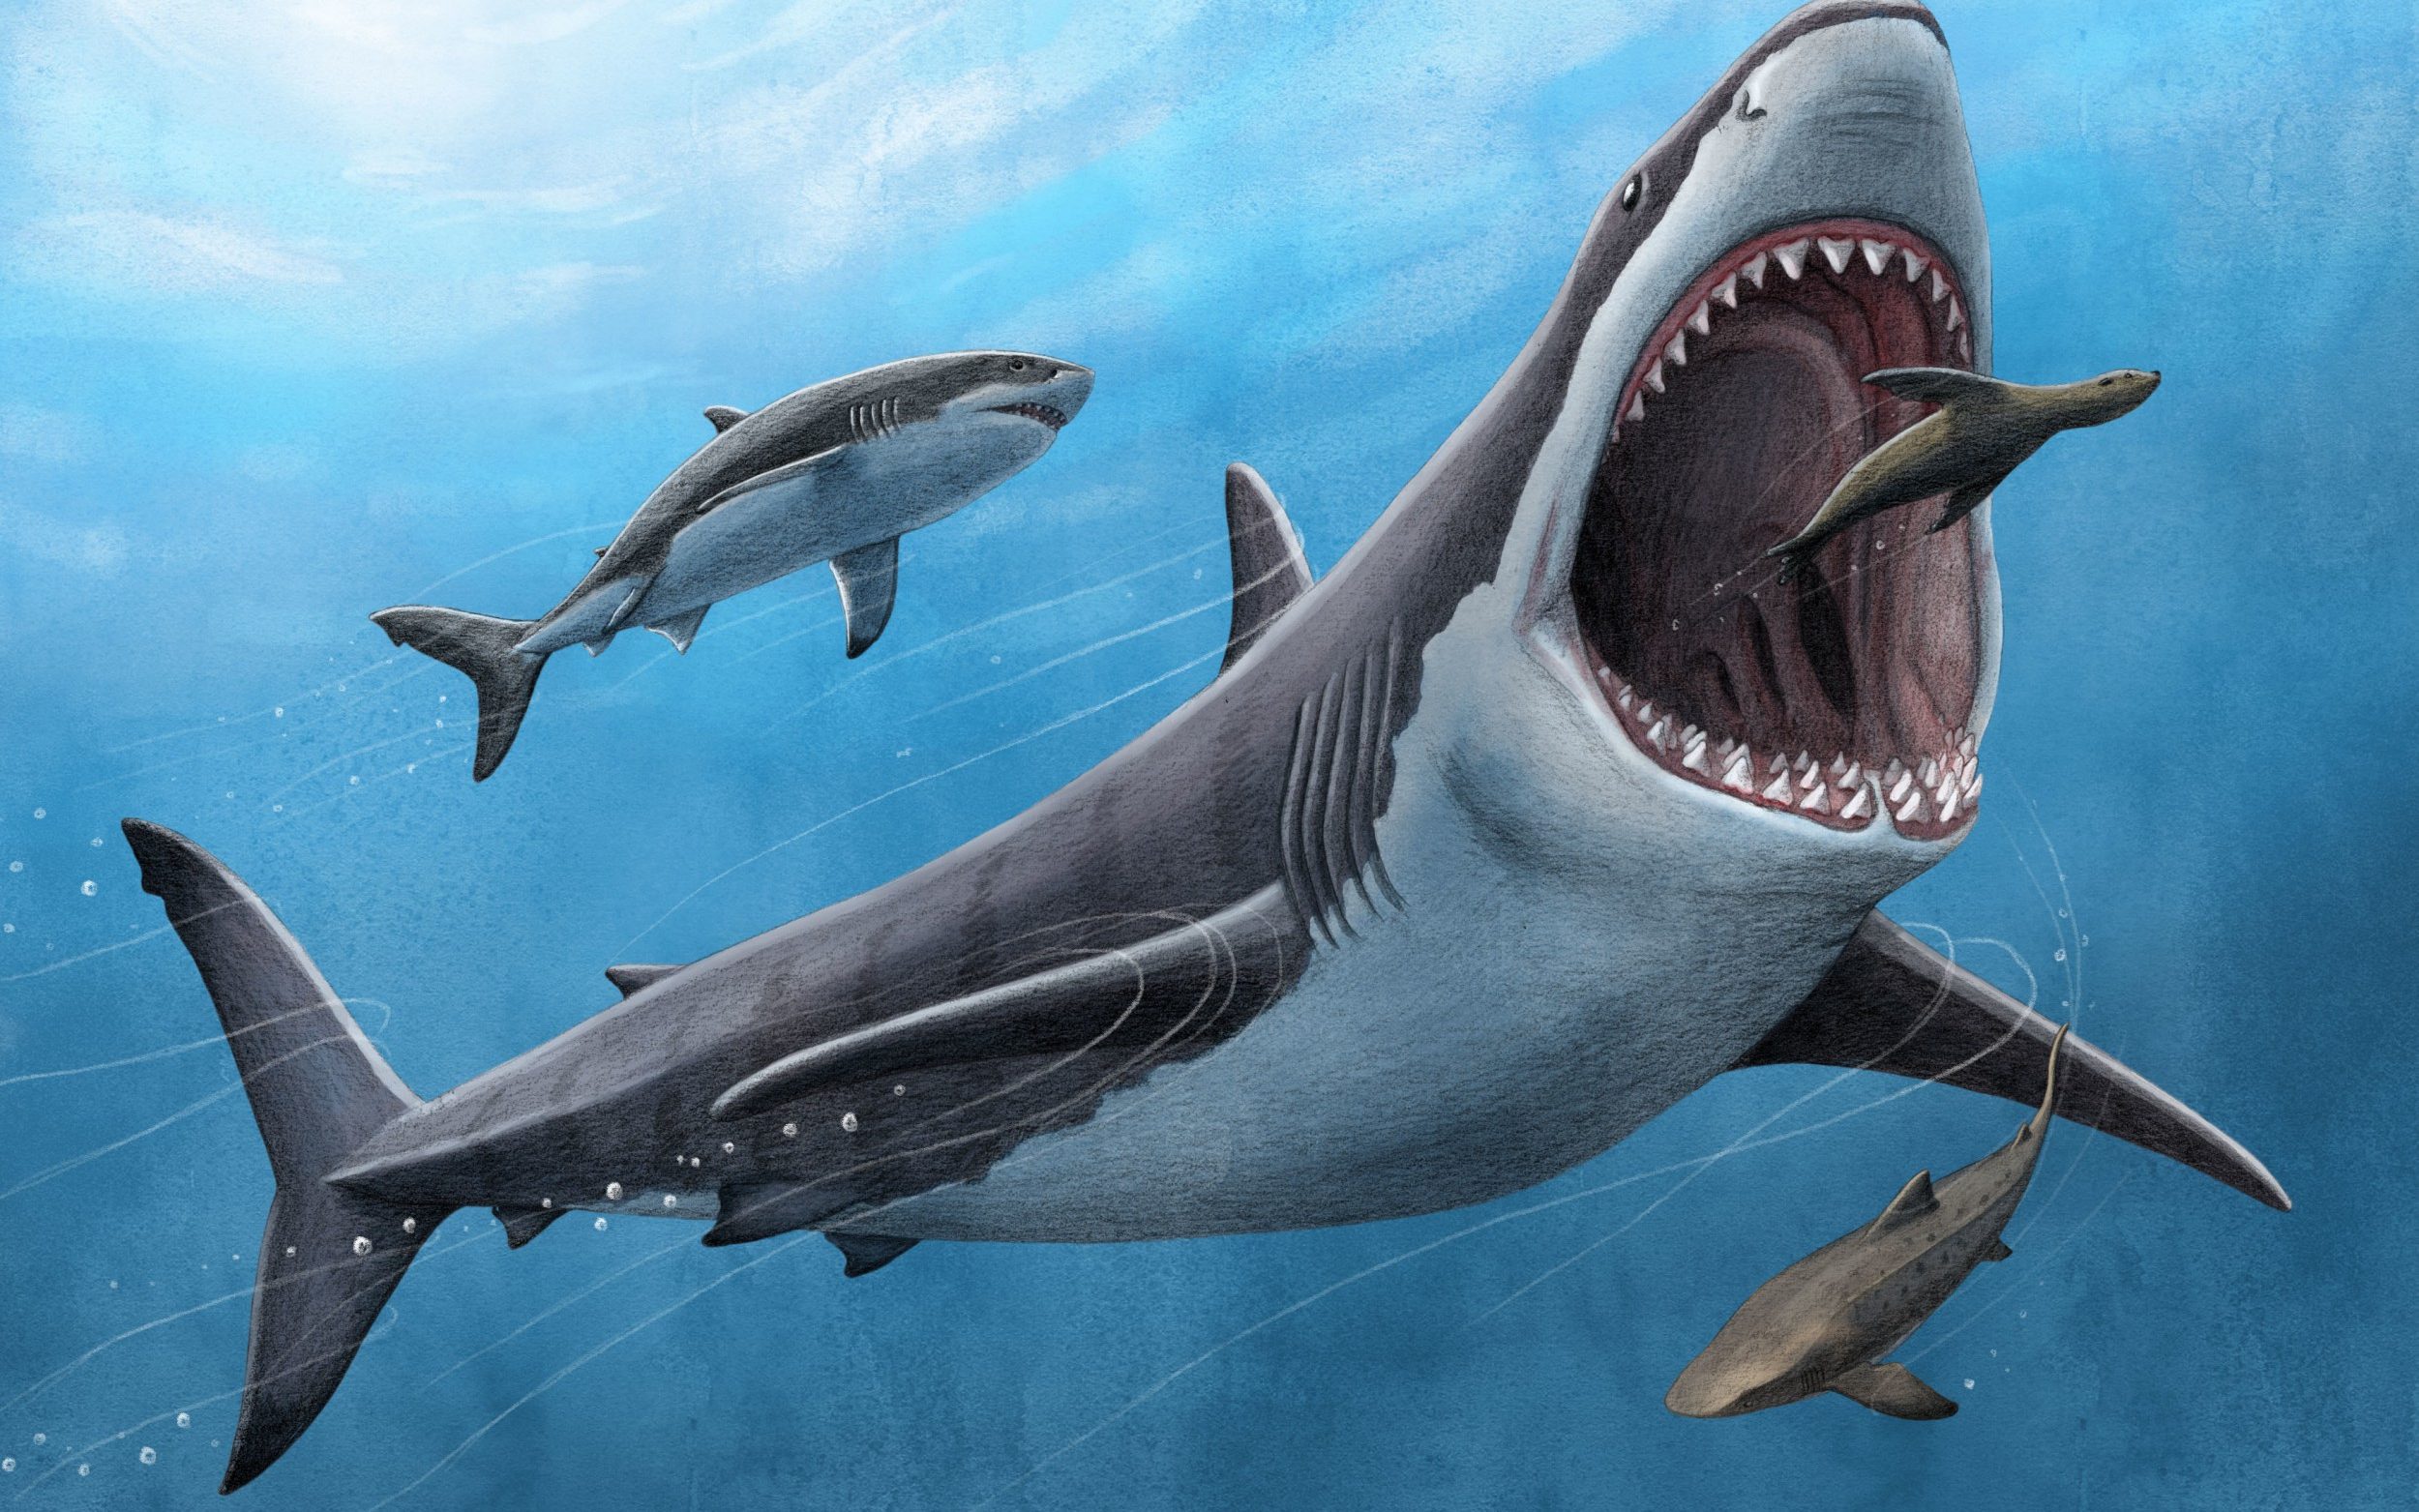 Megalodon was not a cold-blooded killer after all